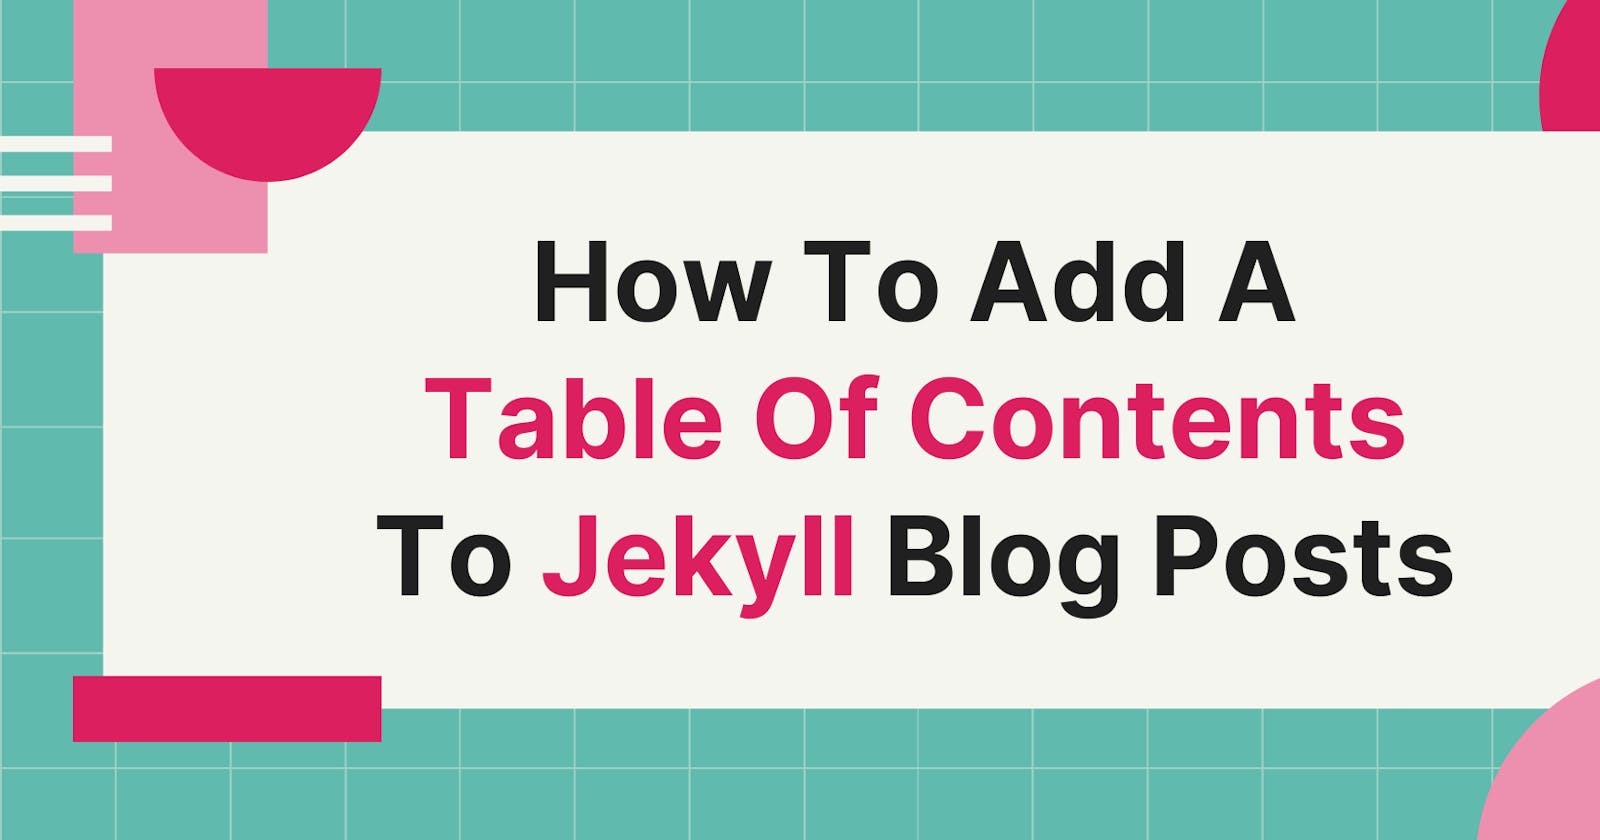 How To Add A Table Of Contents To Jekyll Blog Posts